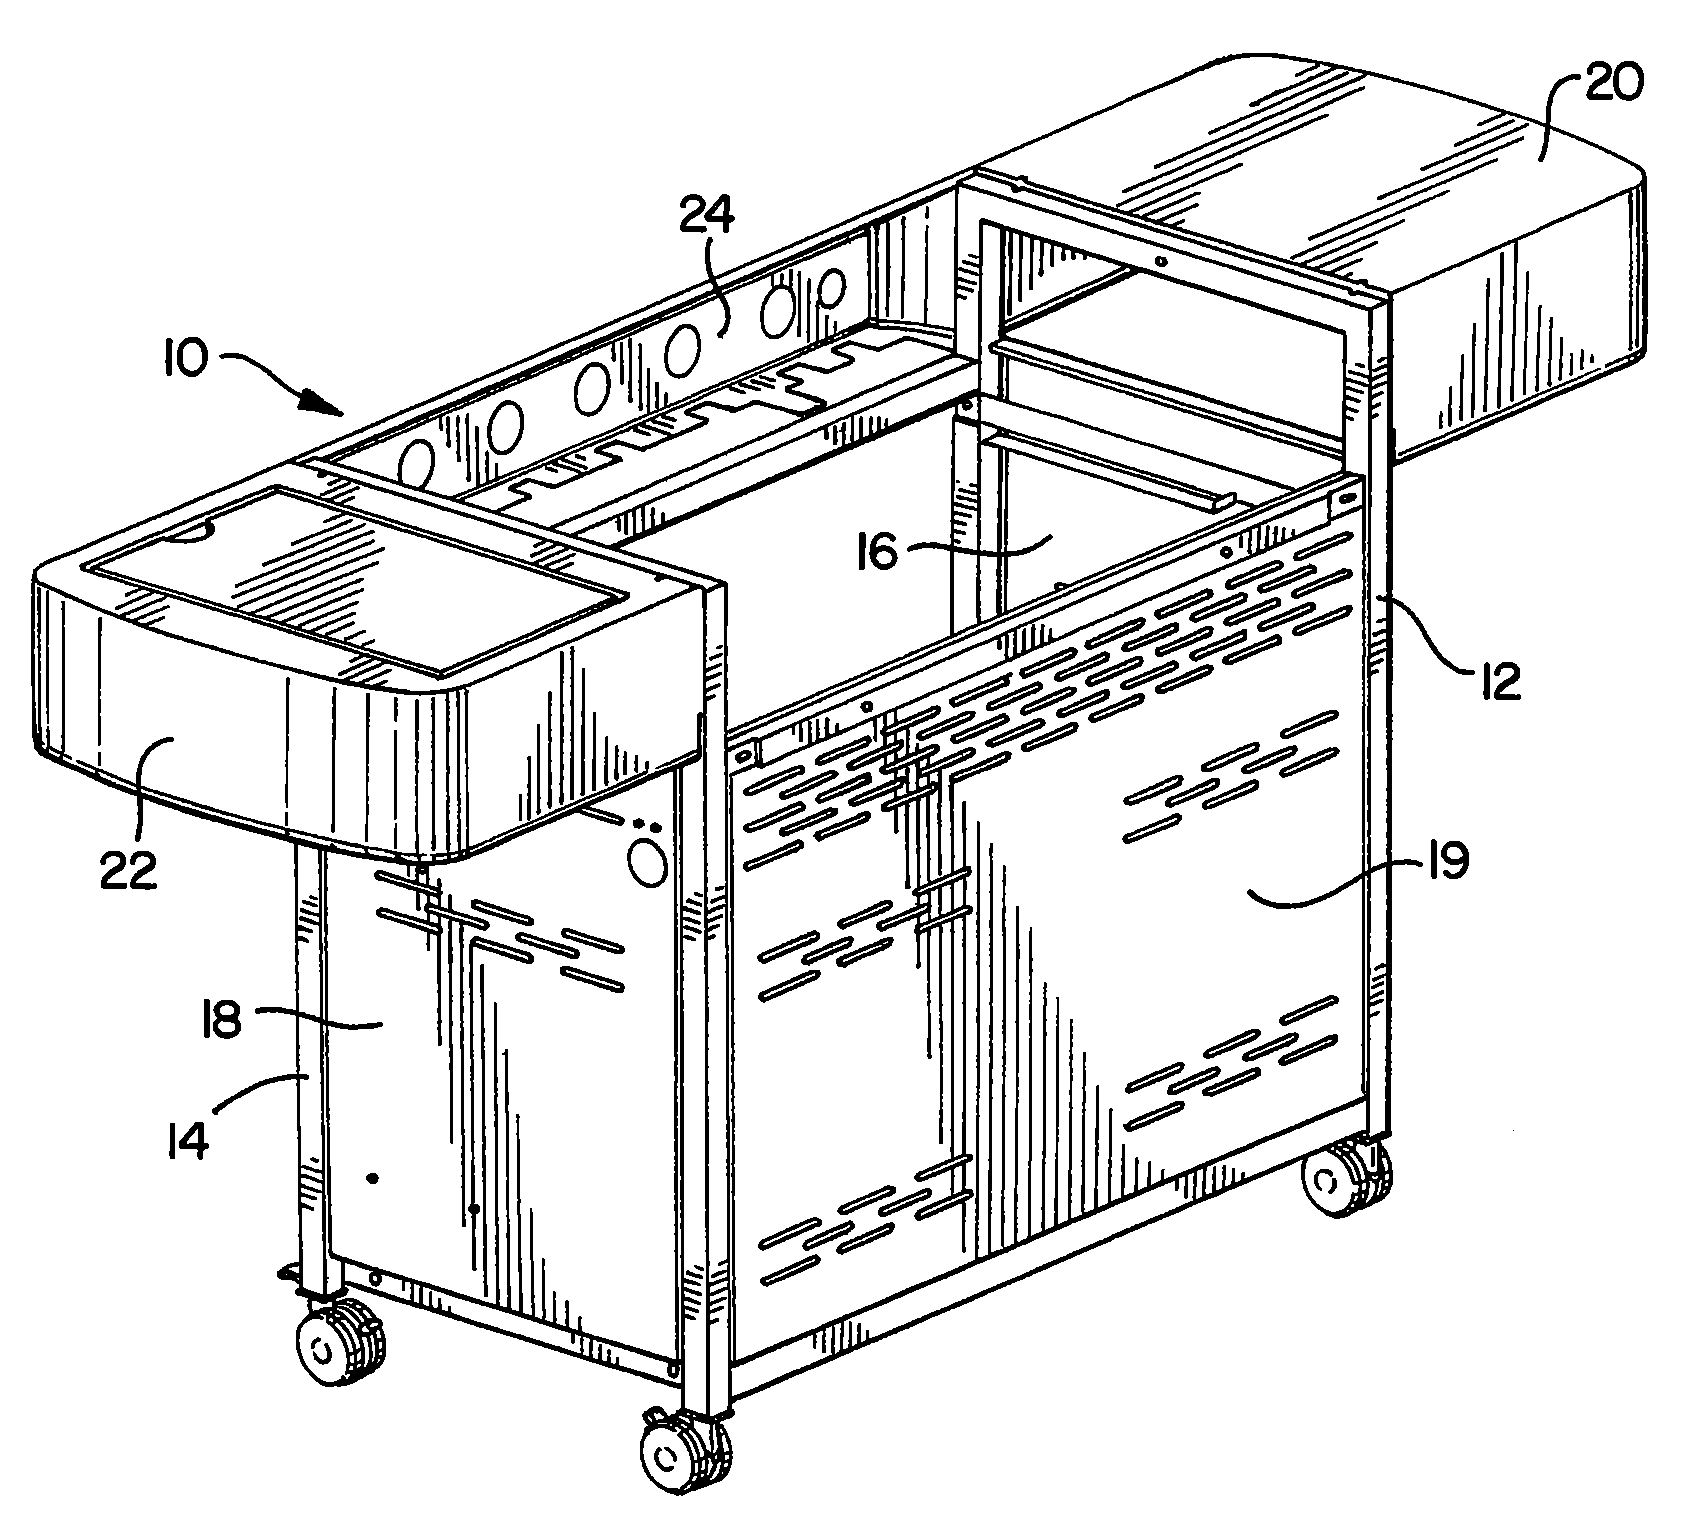 Grill structure